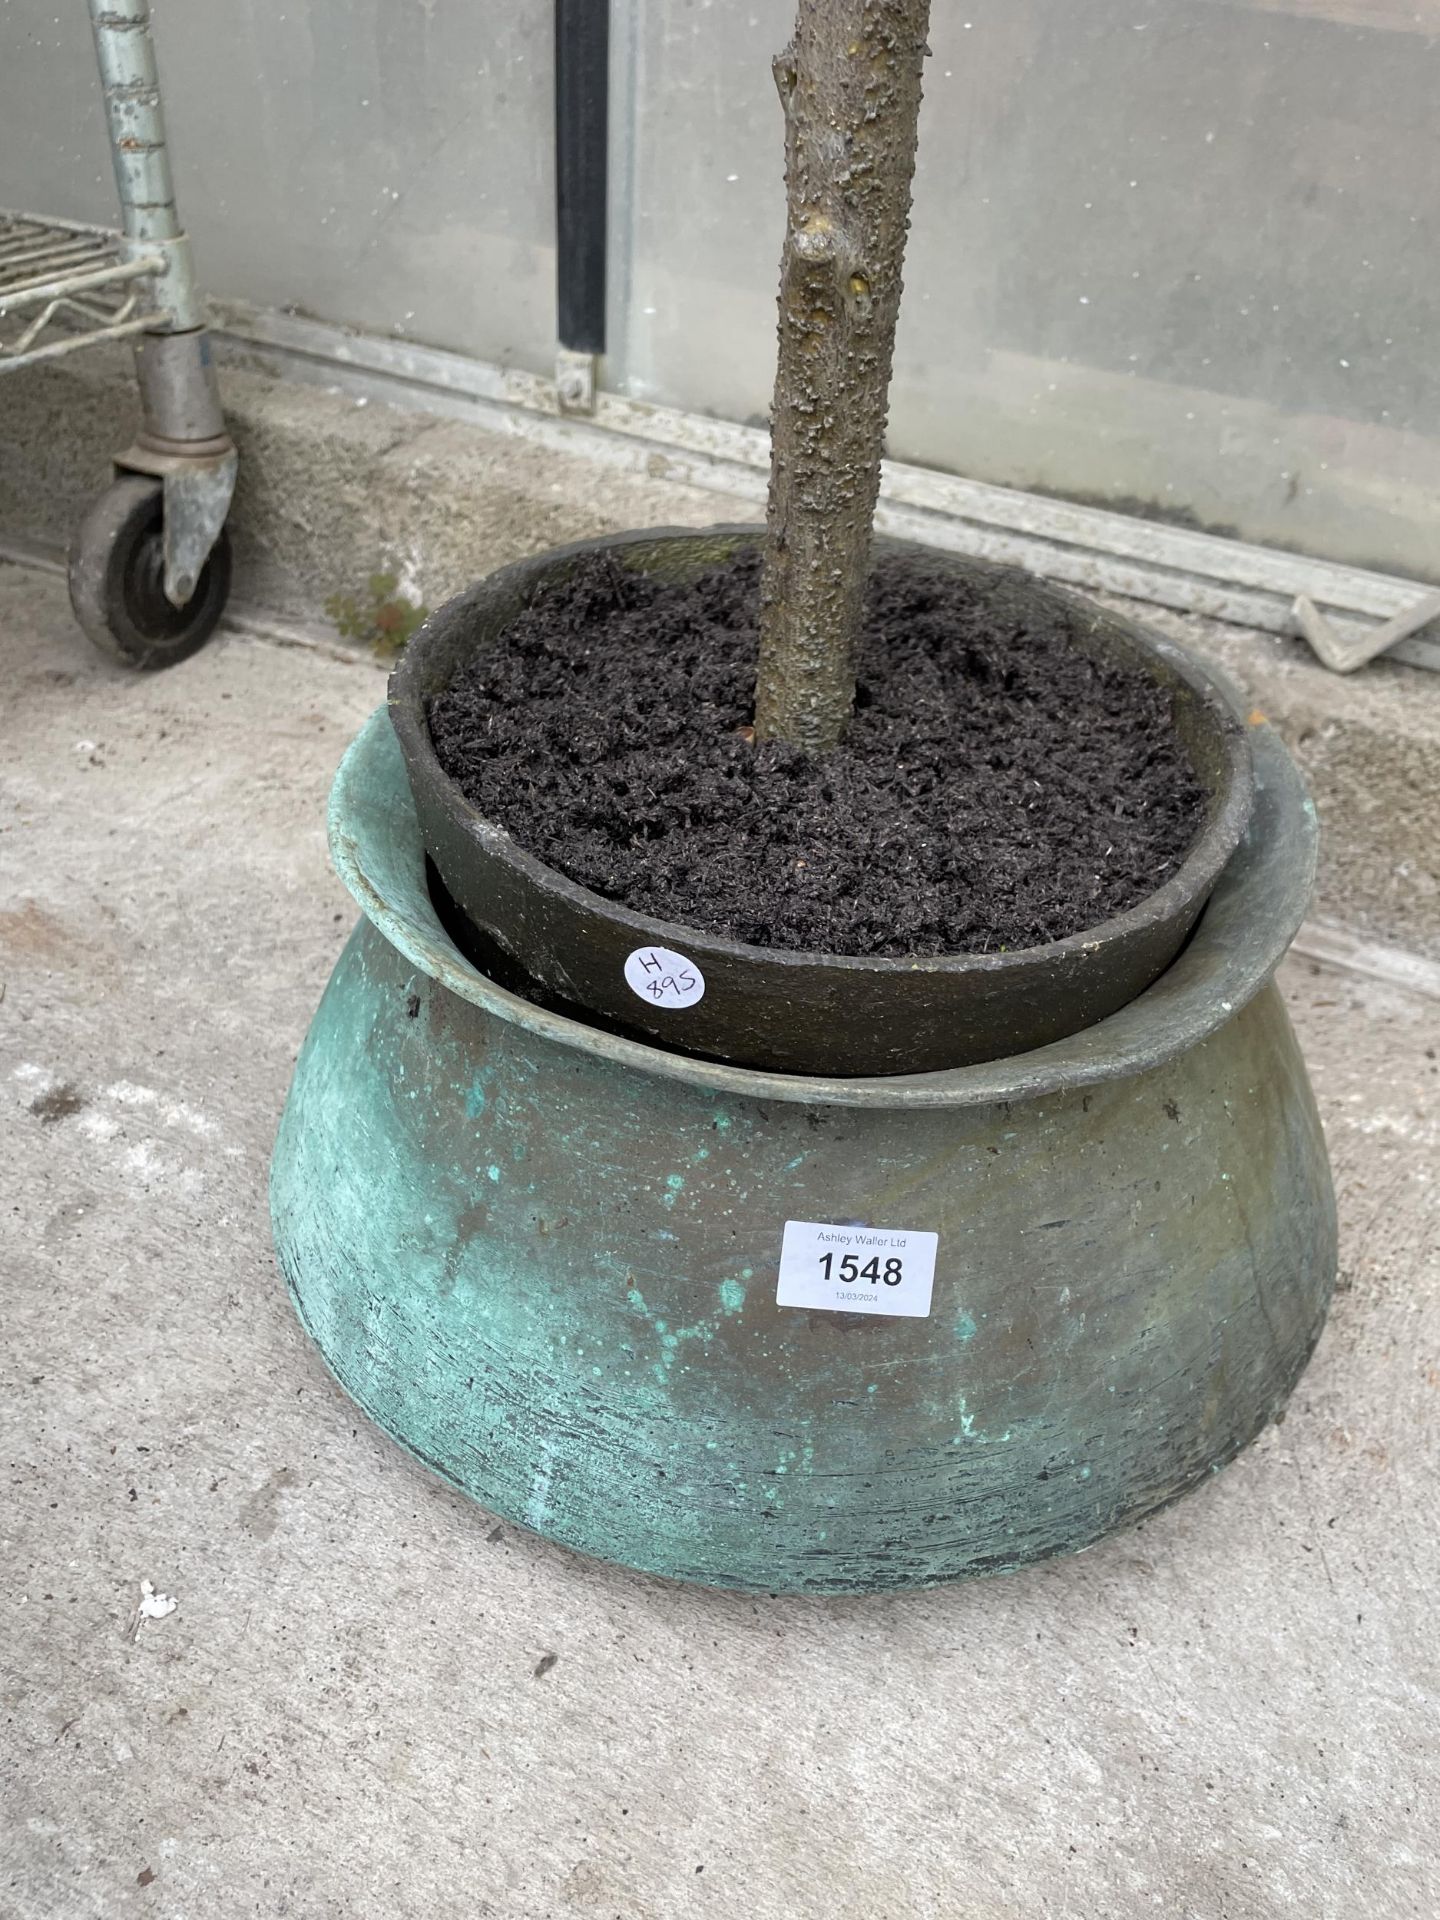 AN ARTIFICIAL ORANGE TREE WITH A DECORATIVE BRASS PLANTER - Image 2 of 4